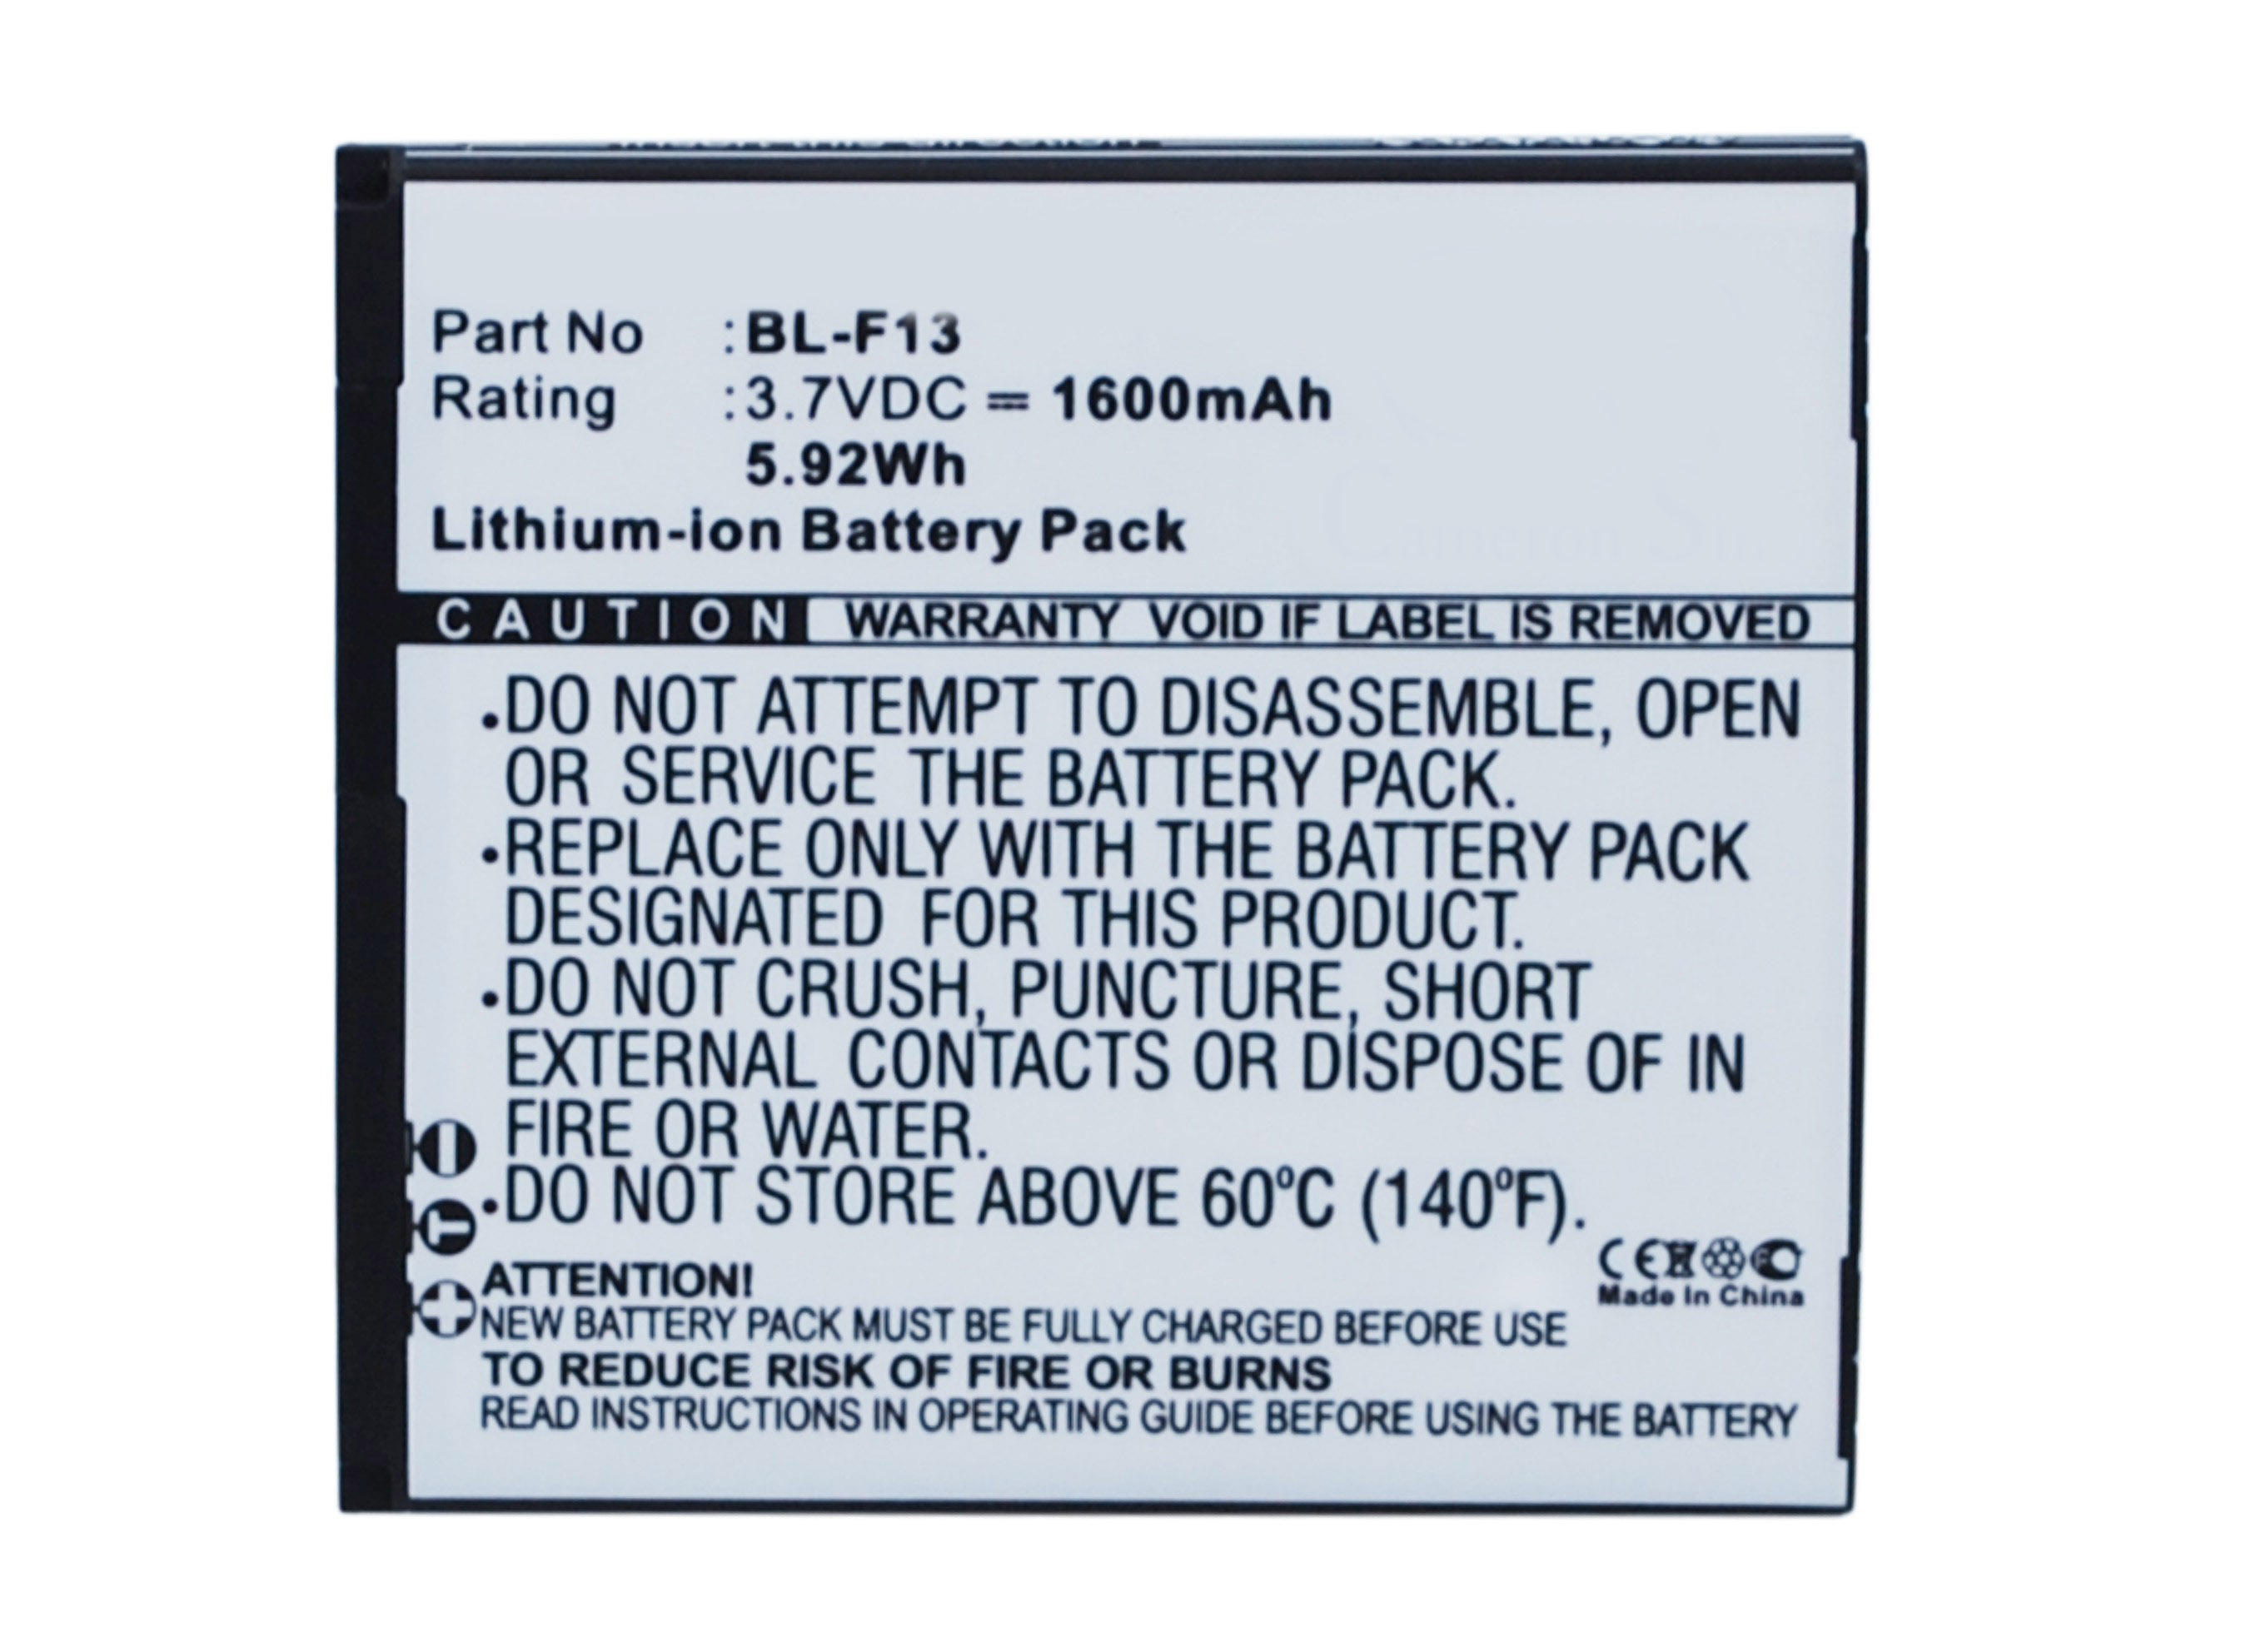 Batteries for PHICOMMCell Phone